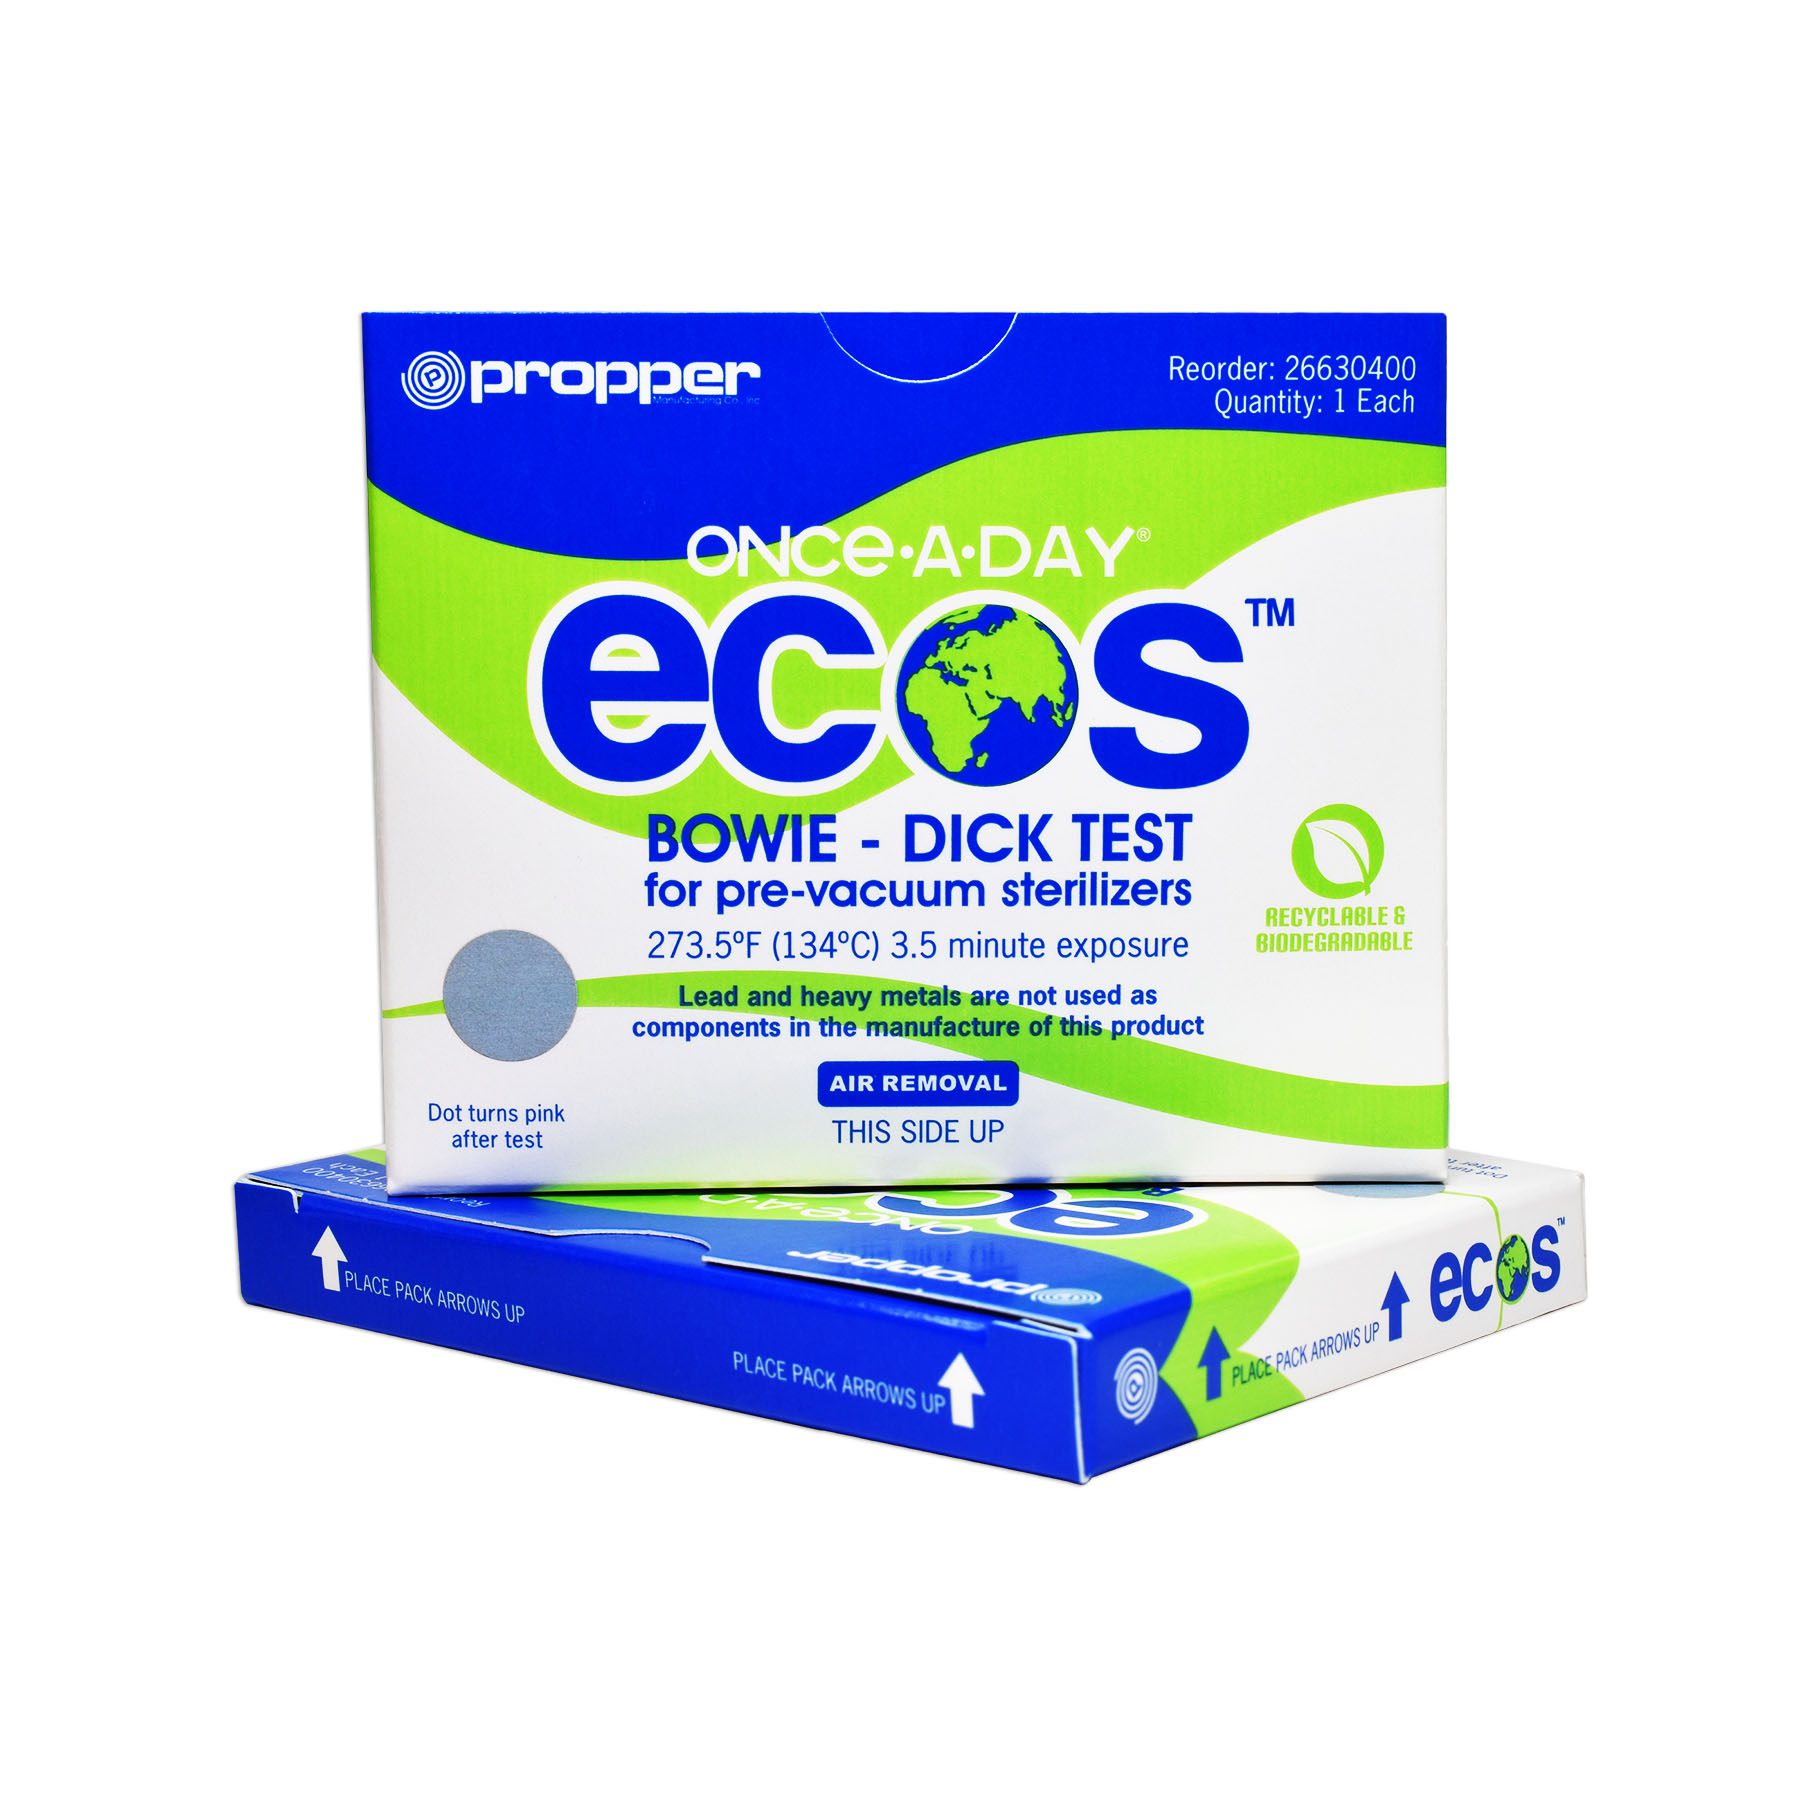 Once-A-Day® Ecos™ Bowie-Dick Test Pack